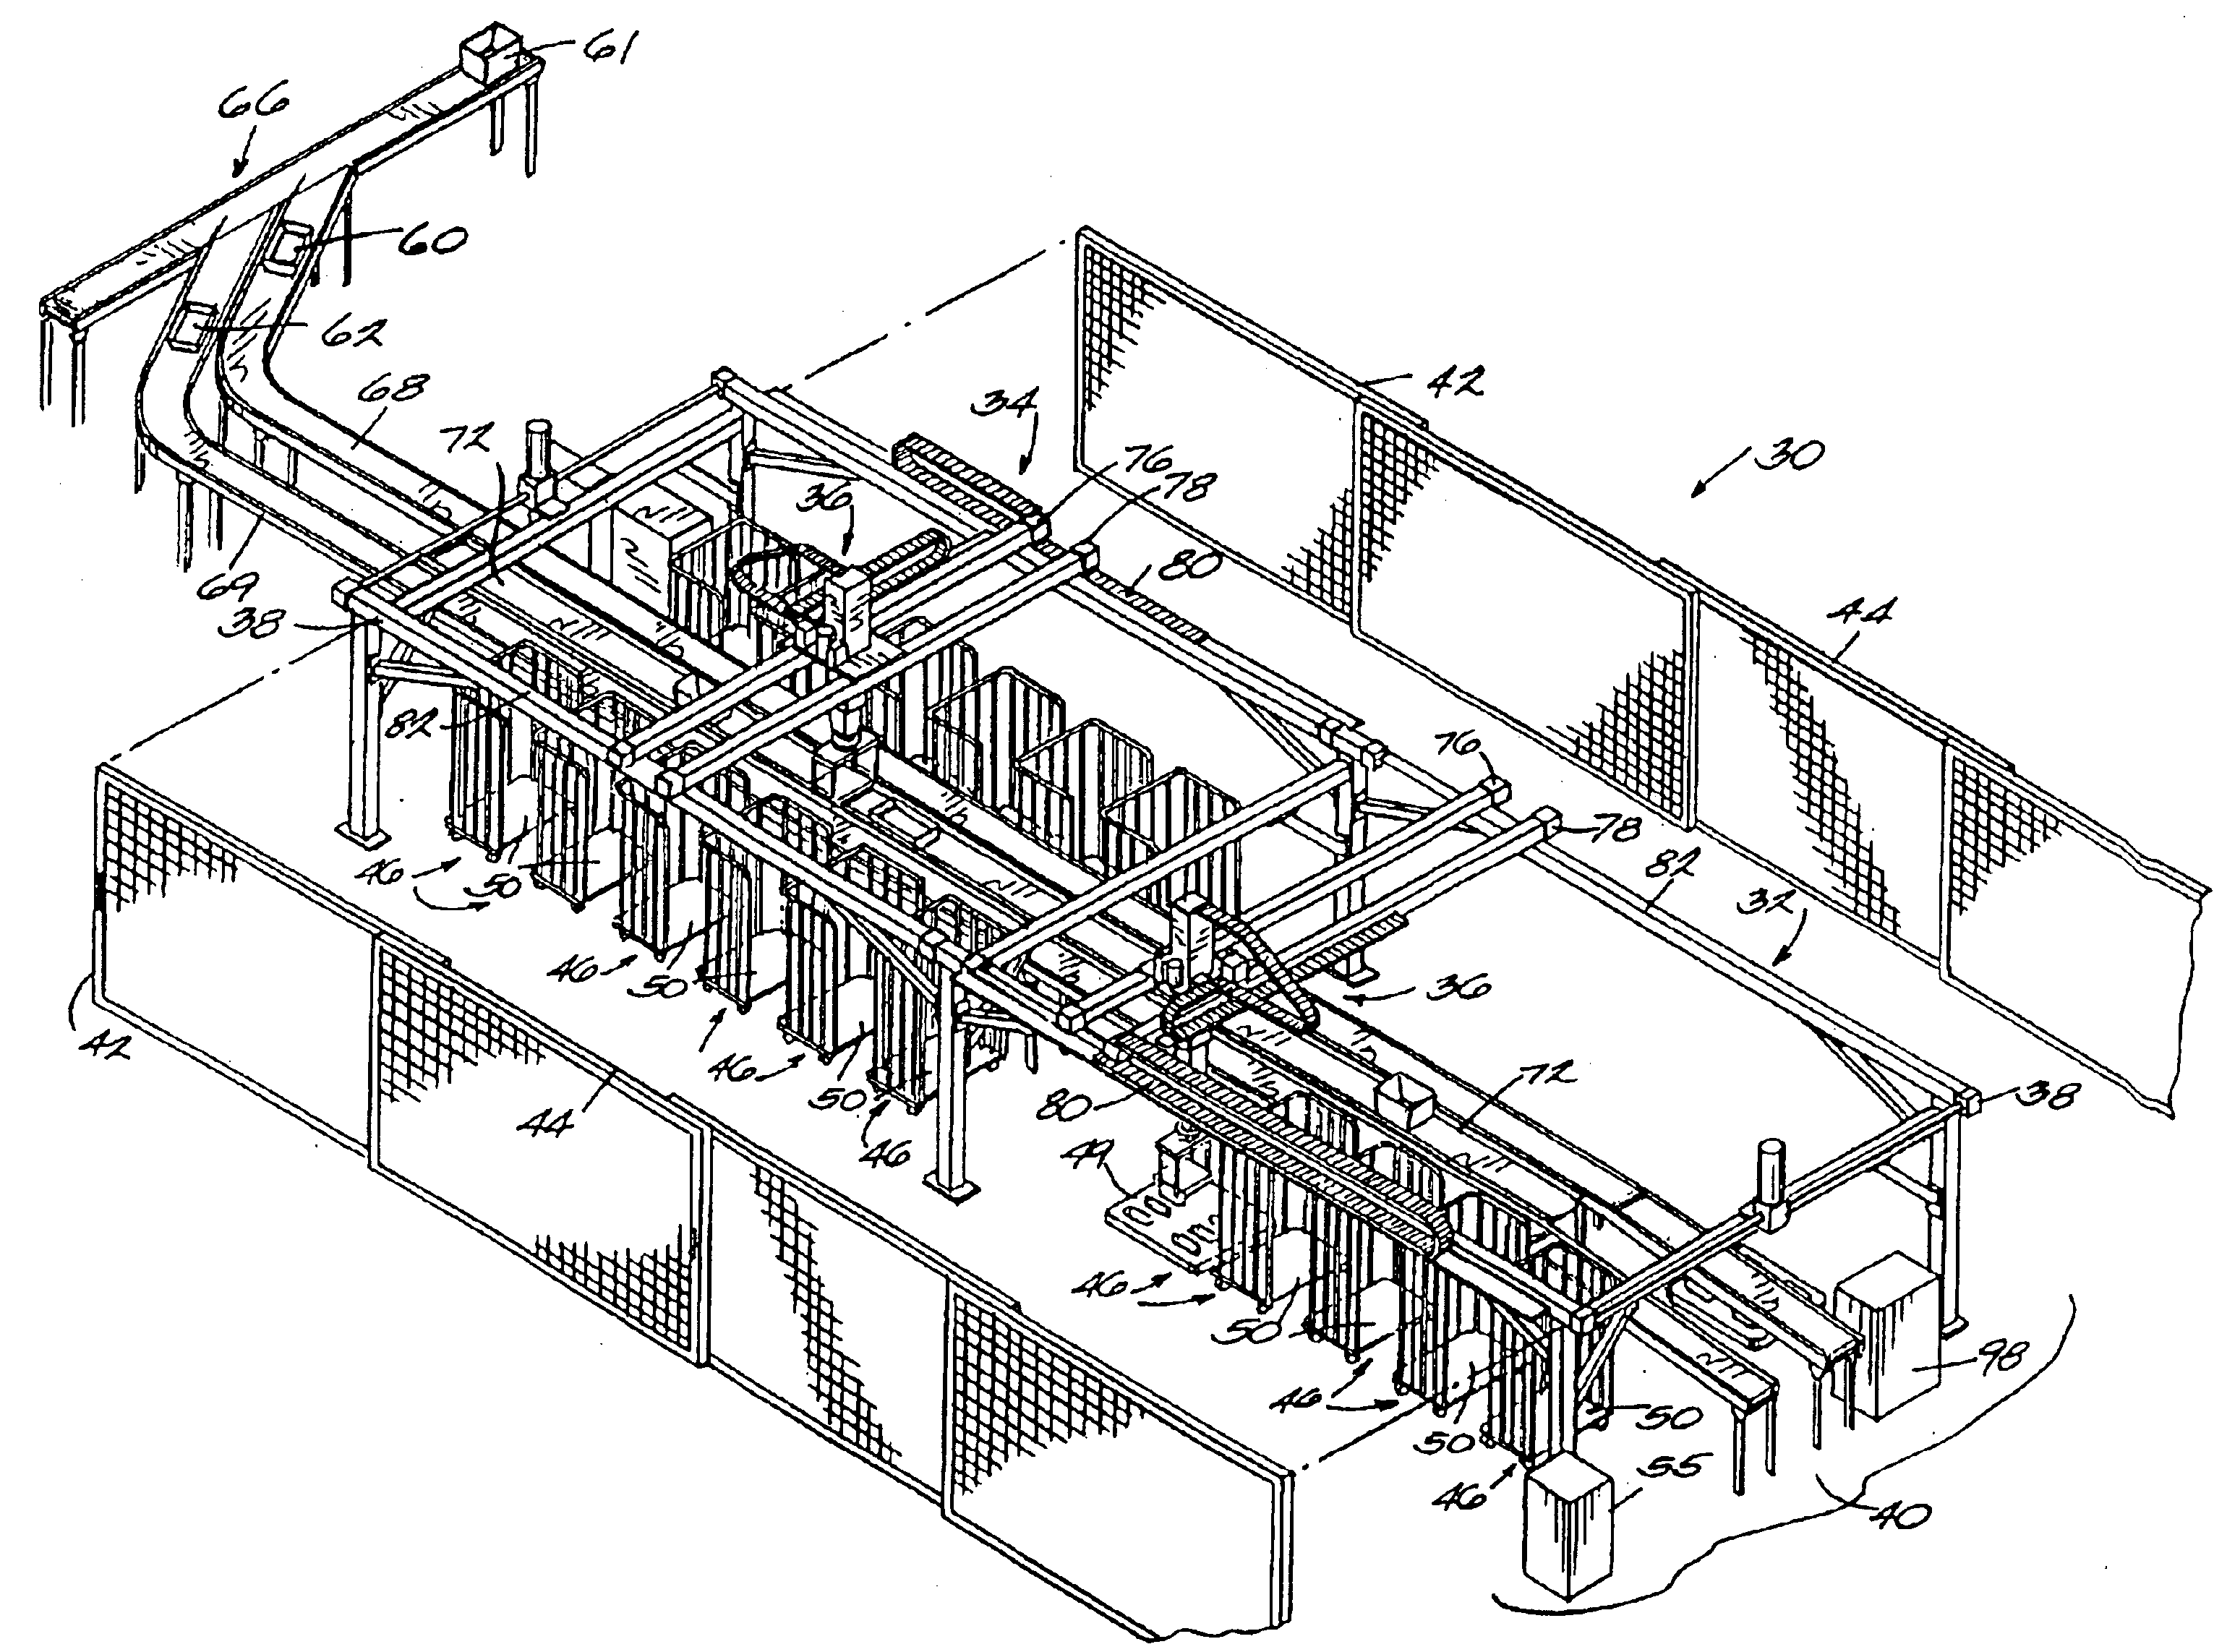 Method of using a robotic containerization and palletizing system